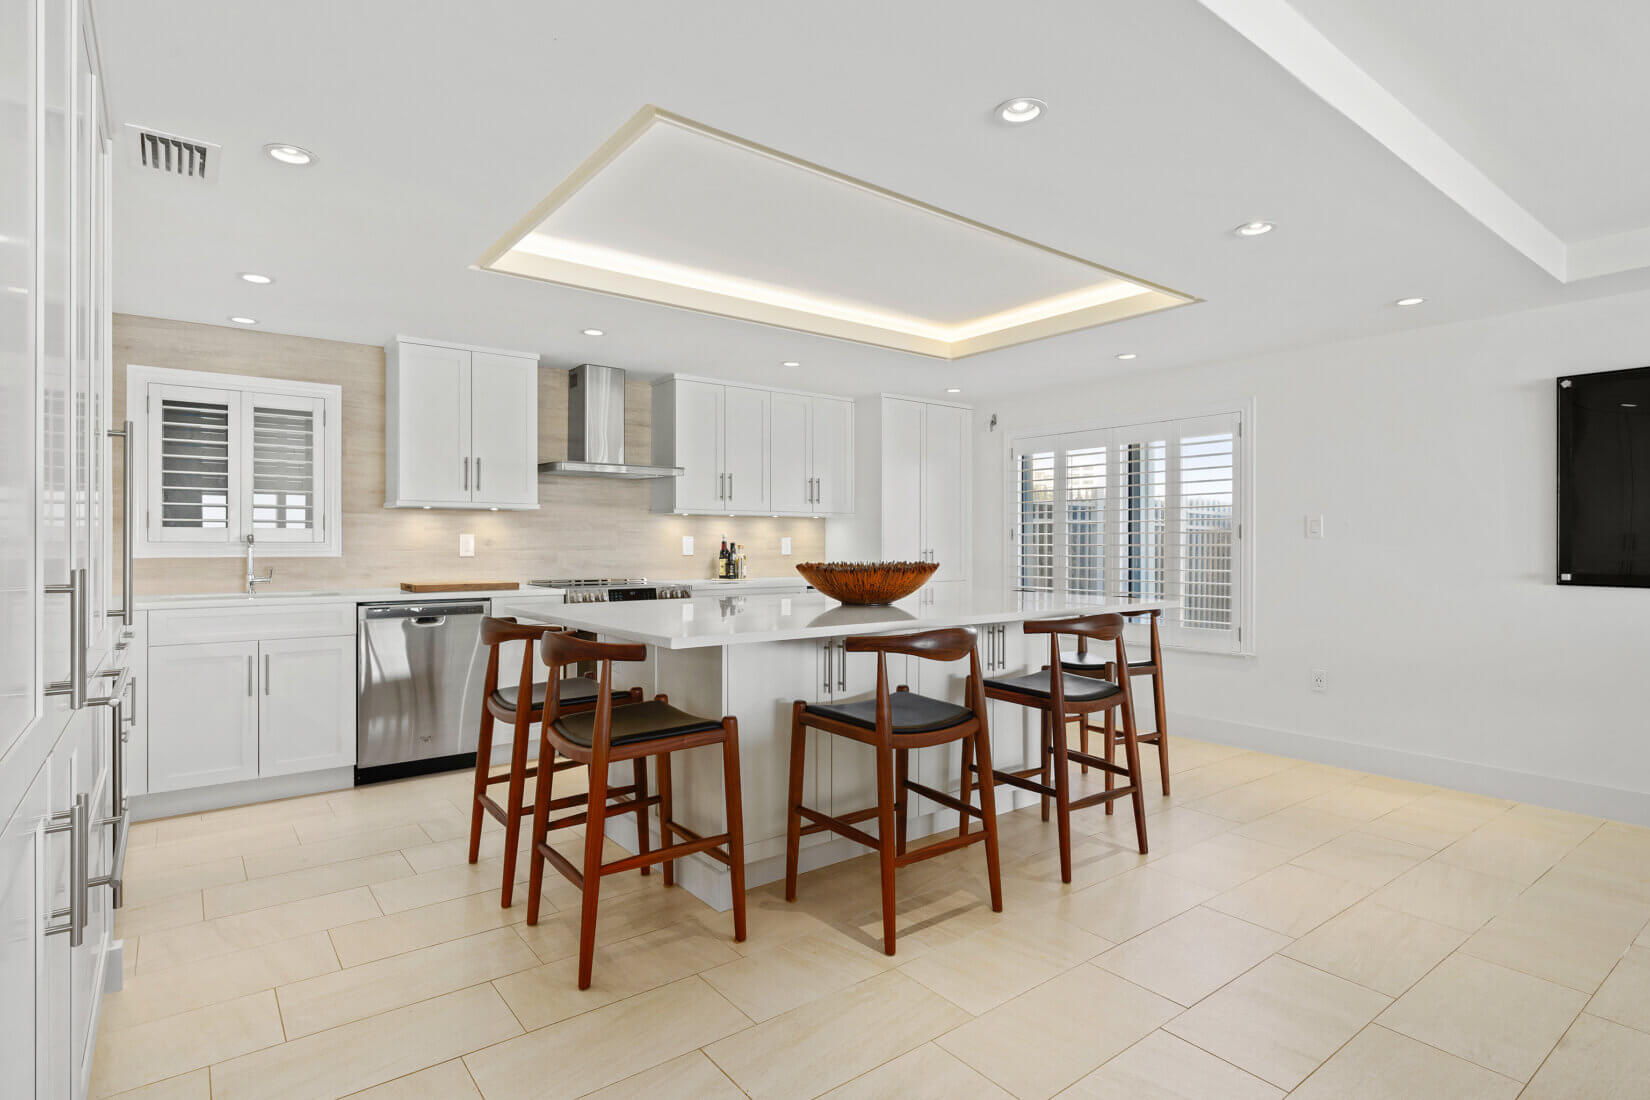 Sleek white kitchen with tall cabinetry and a spacious island with seating around it